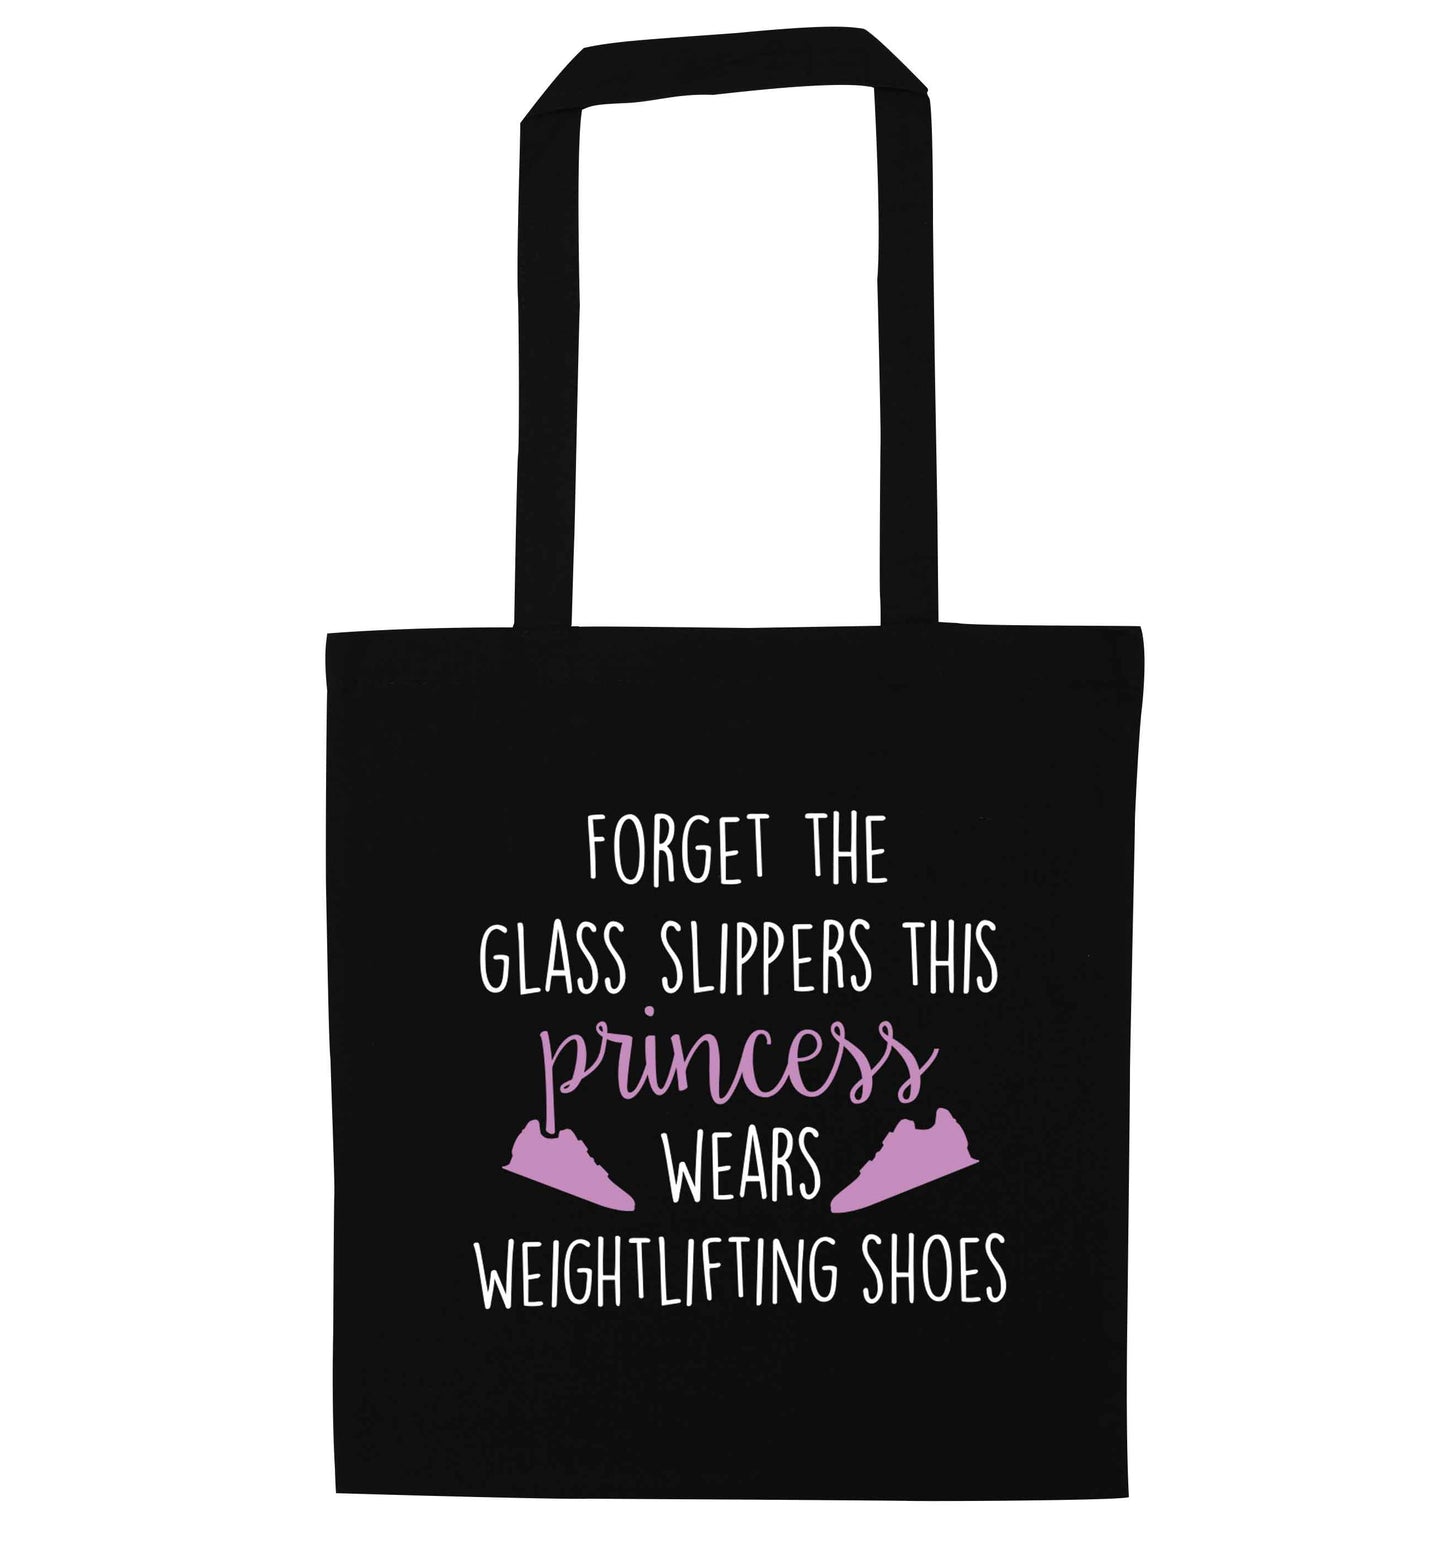 Forget the glass slippers this princess wears weightlifting shoes black tote bag